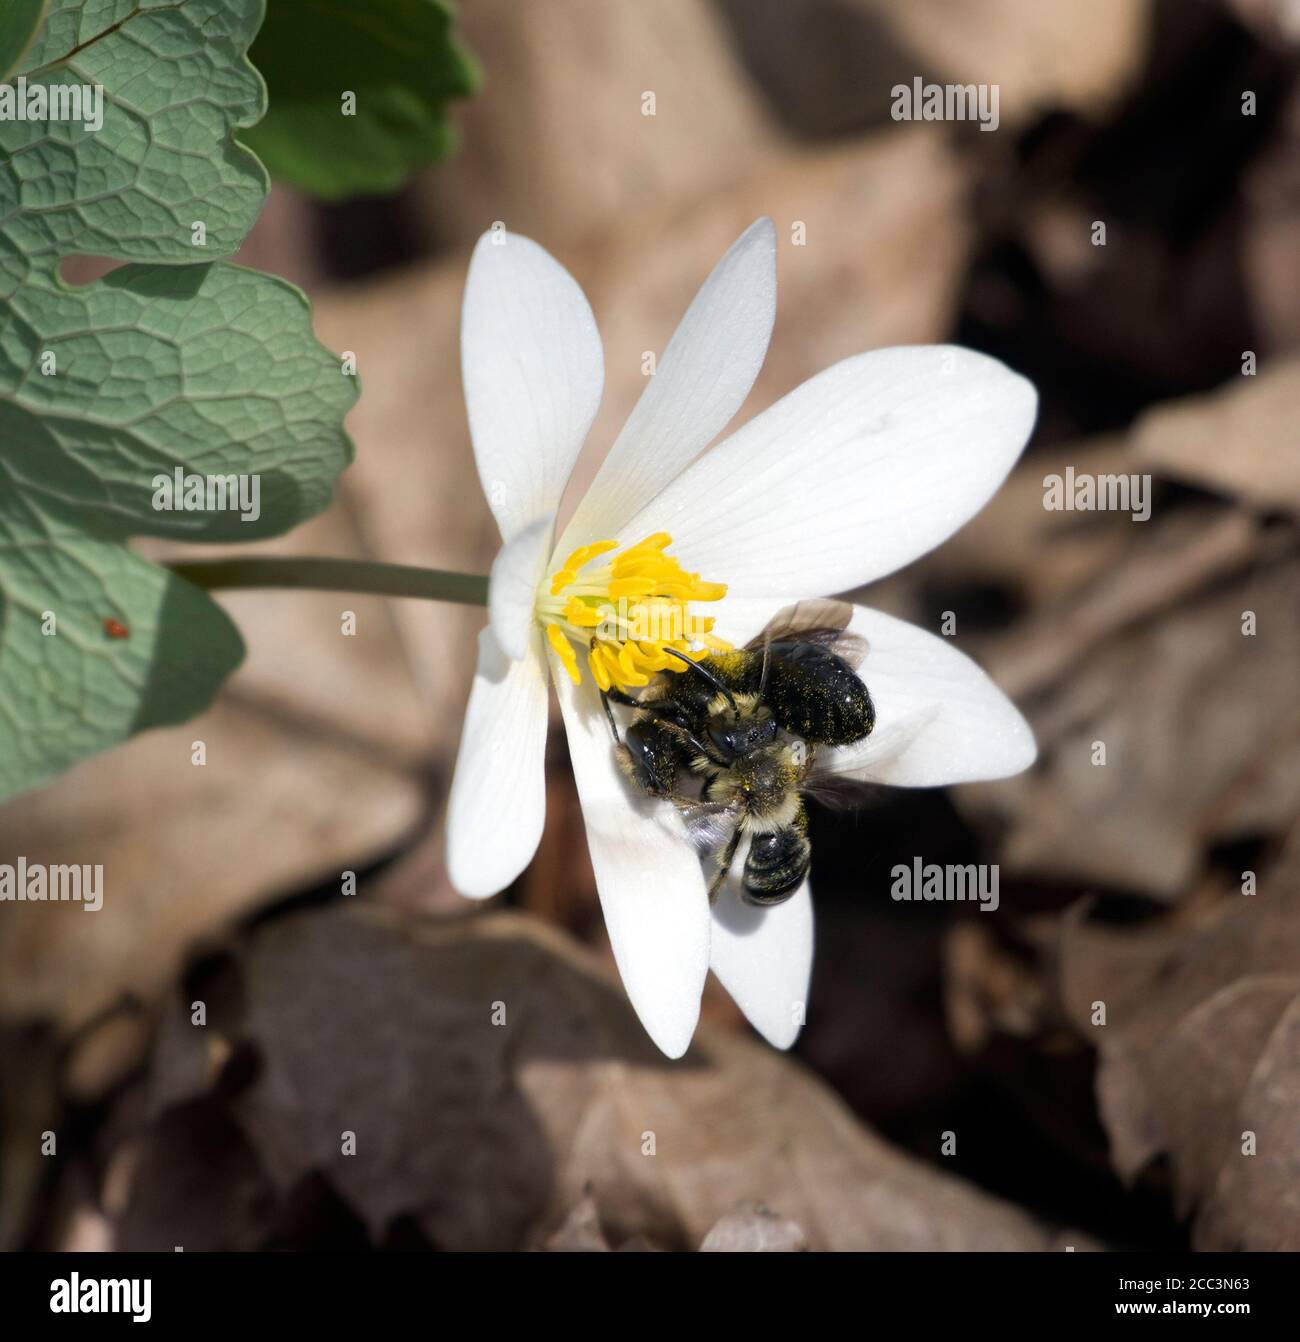 Large mining bee, Andrena sp. and Cellophane bee, Colletes sp. competing for territory or pollen of Bloodroot, Sanguinaria canadensis, flower. Stock Photo